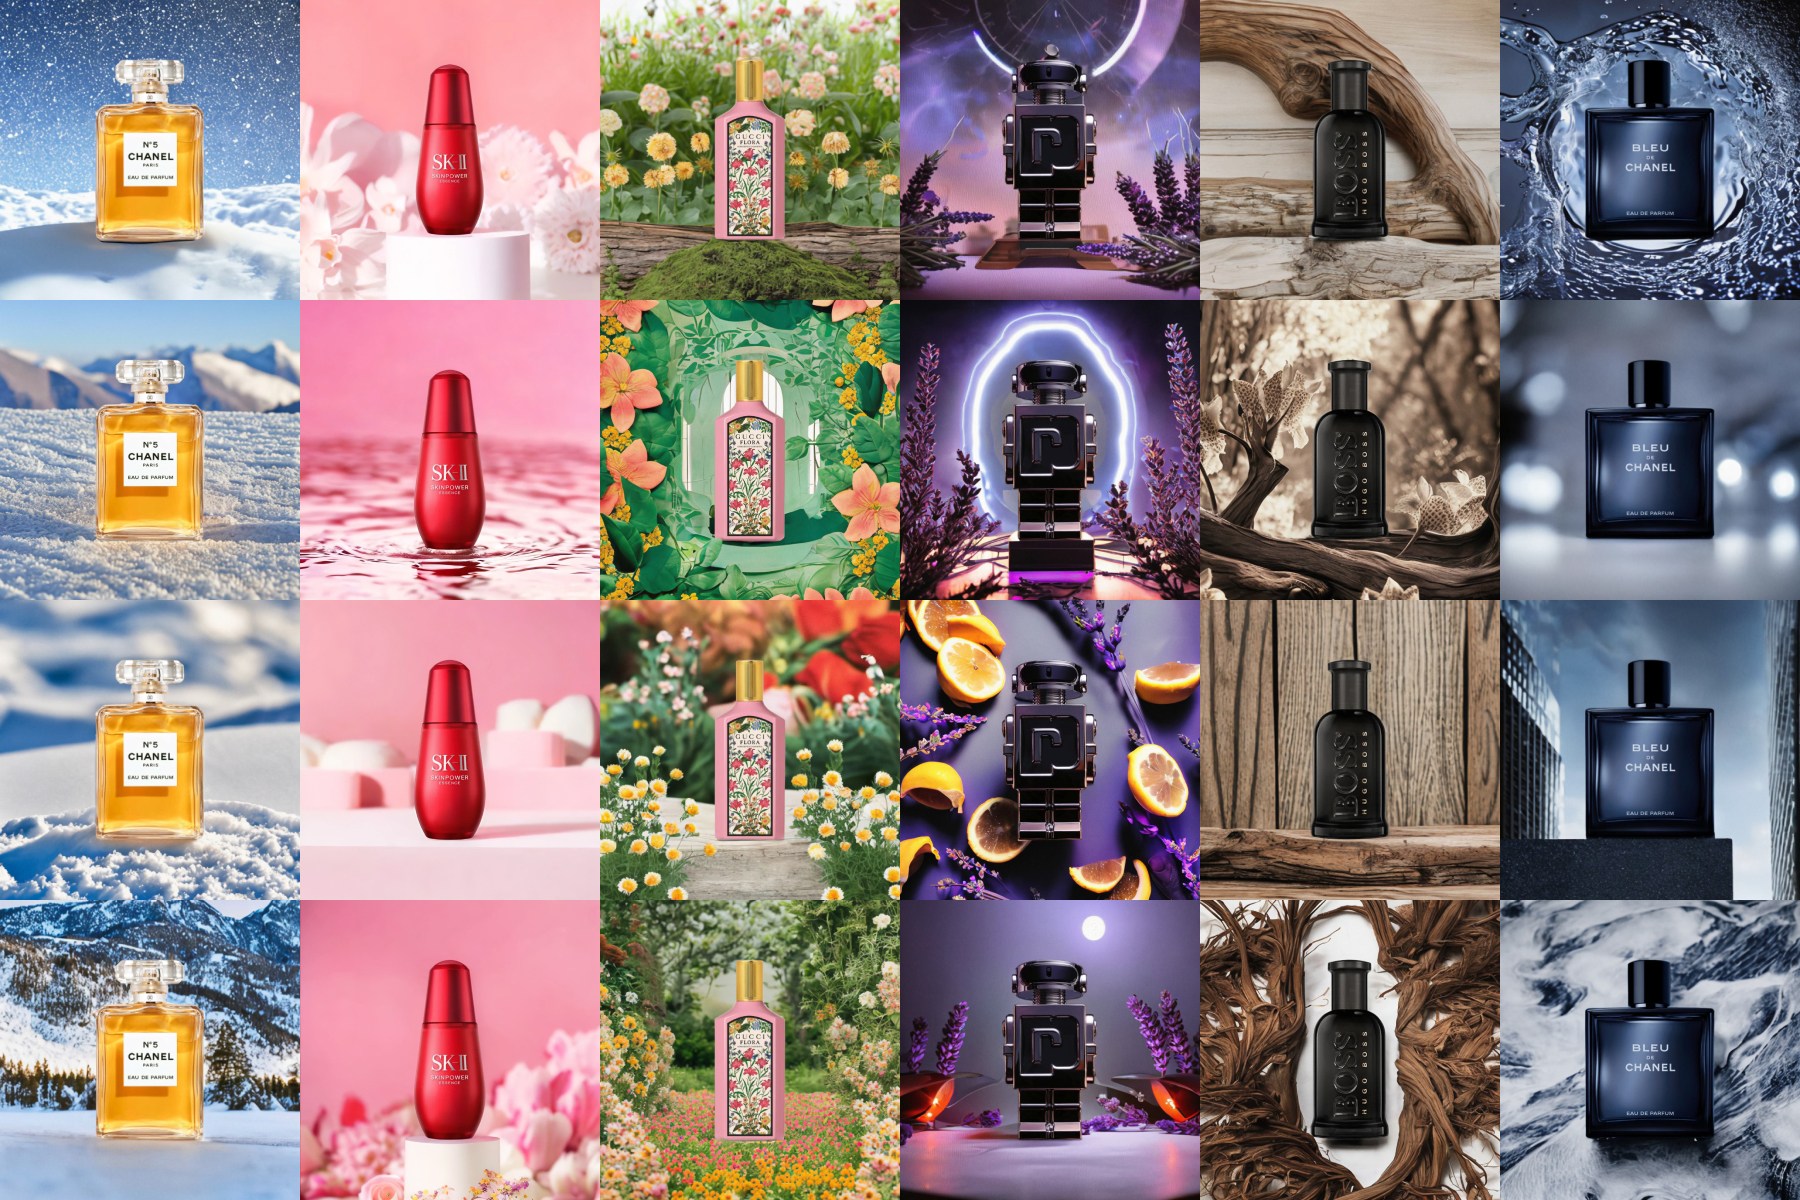 A collage of product images with consistent brand colors